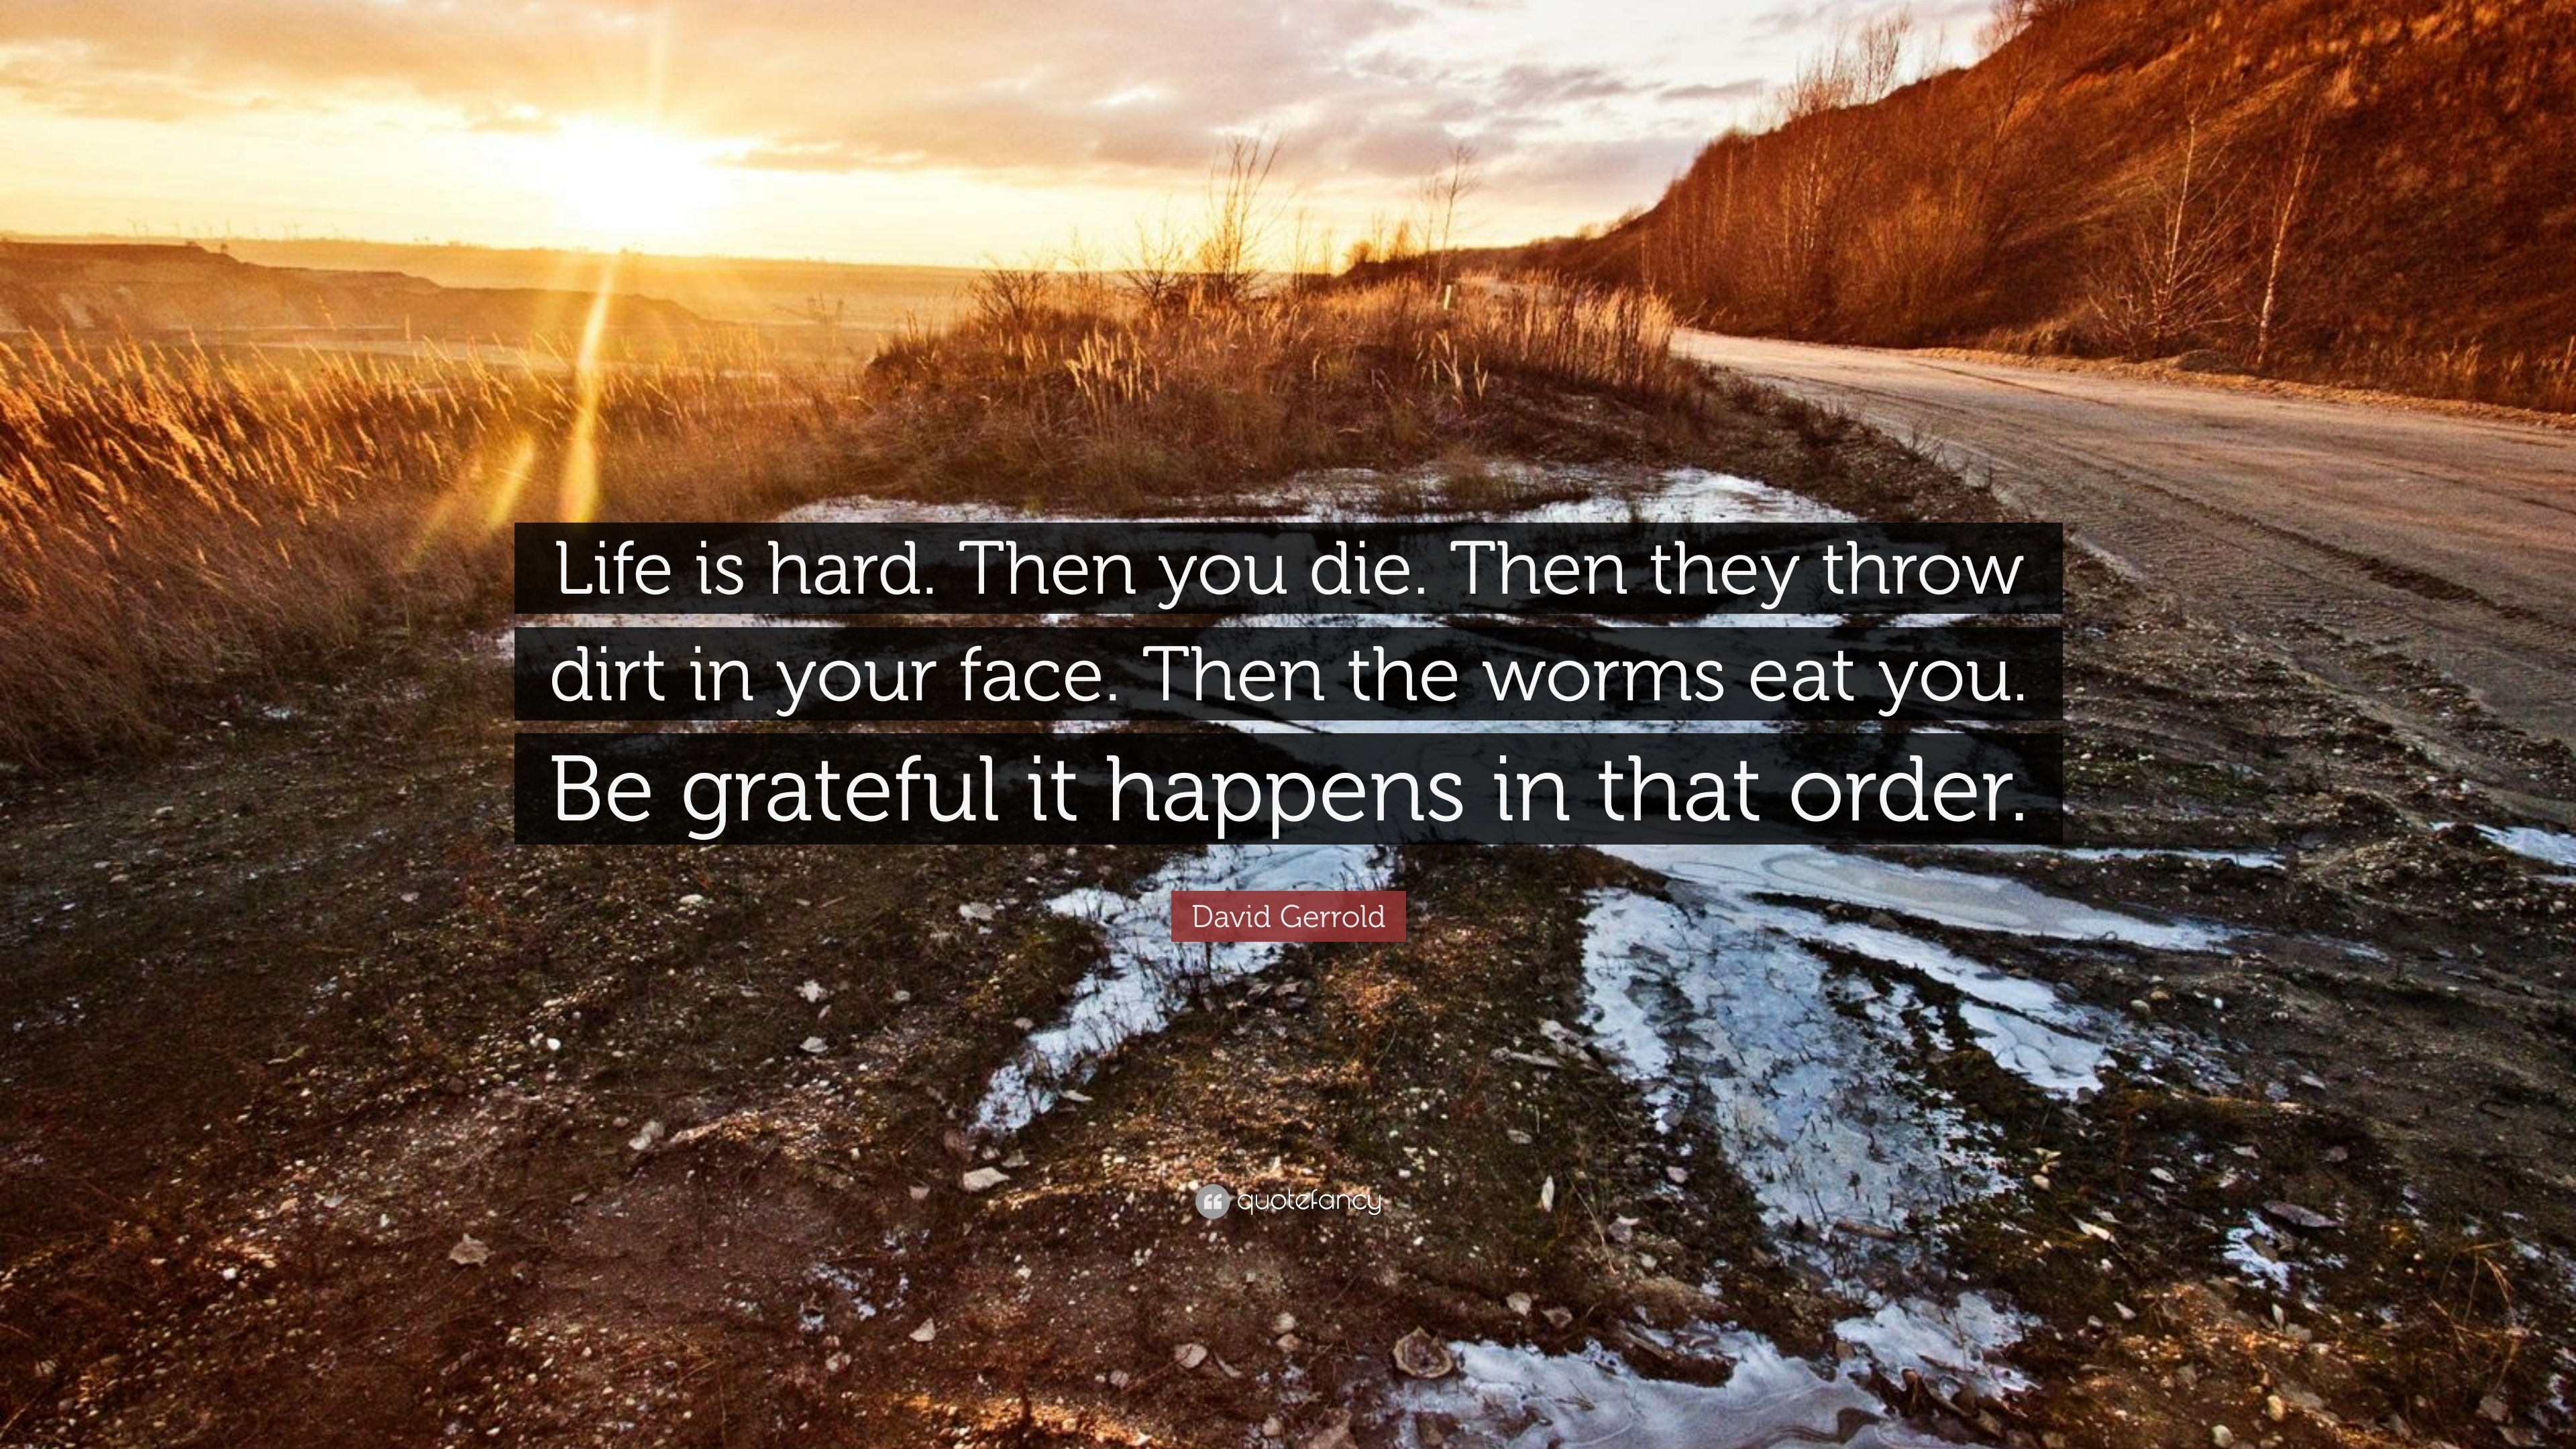 David Gerrold Quote “Life is hard Then you Then they throw